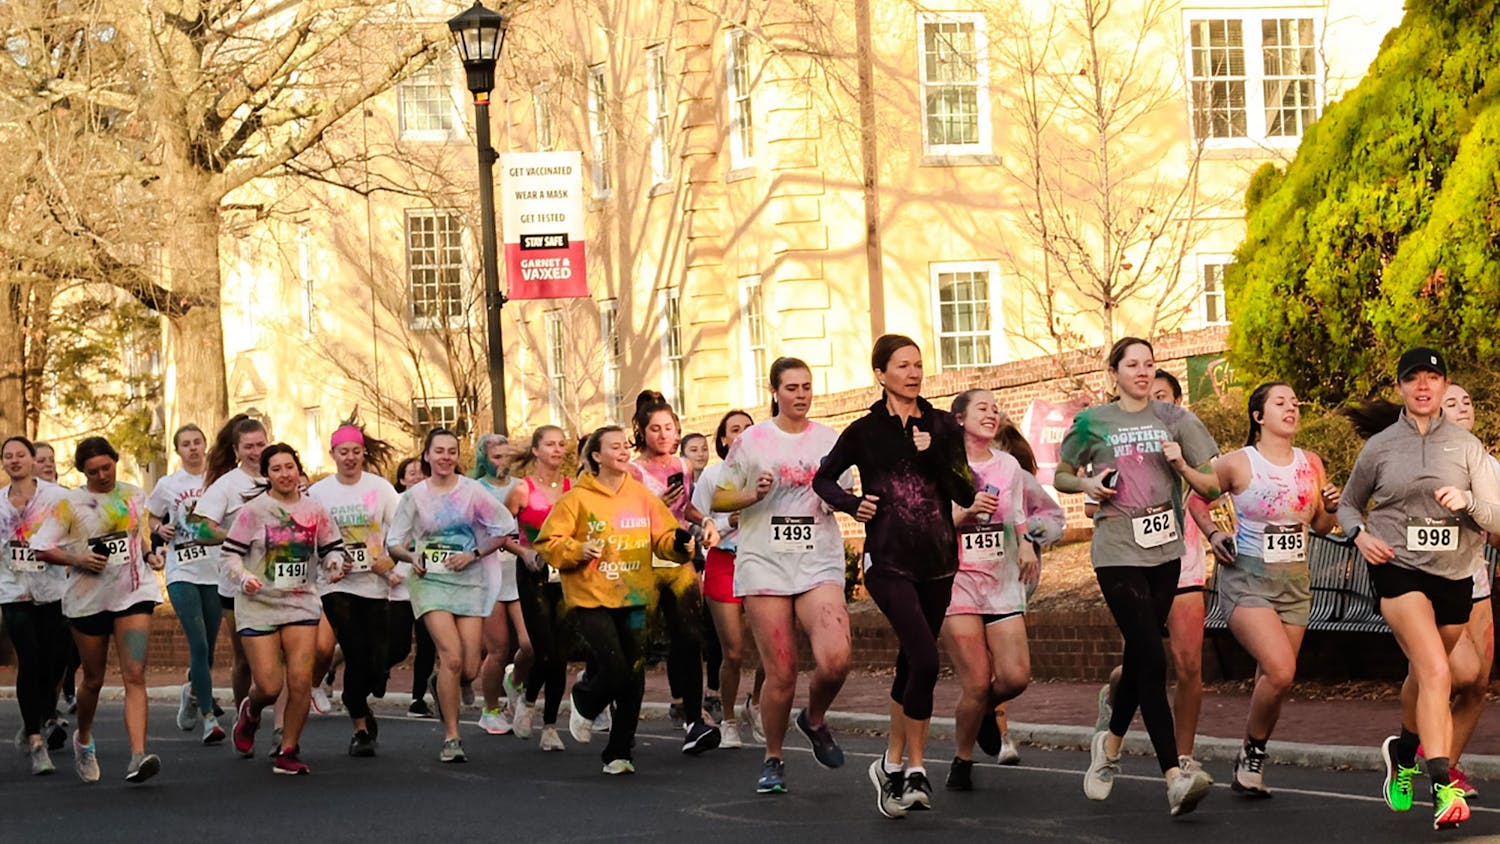 Group of participants in Dance Marathon's annual 5K marathon jog down Greene Street on Saturday, Feb. 26, 2022. Participants of USC Dance Marathon's annual 5K race ran the race covered in colorful clothing too, as part of this edition's "color run."